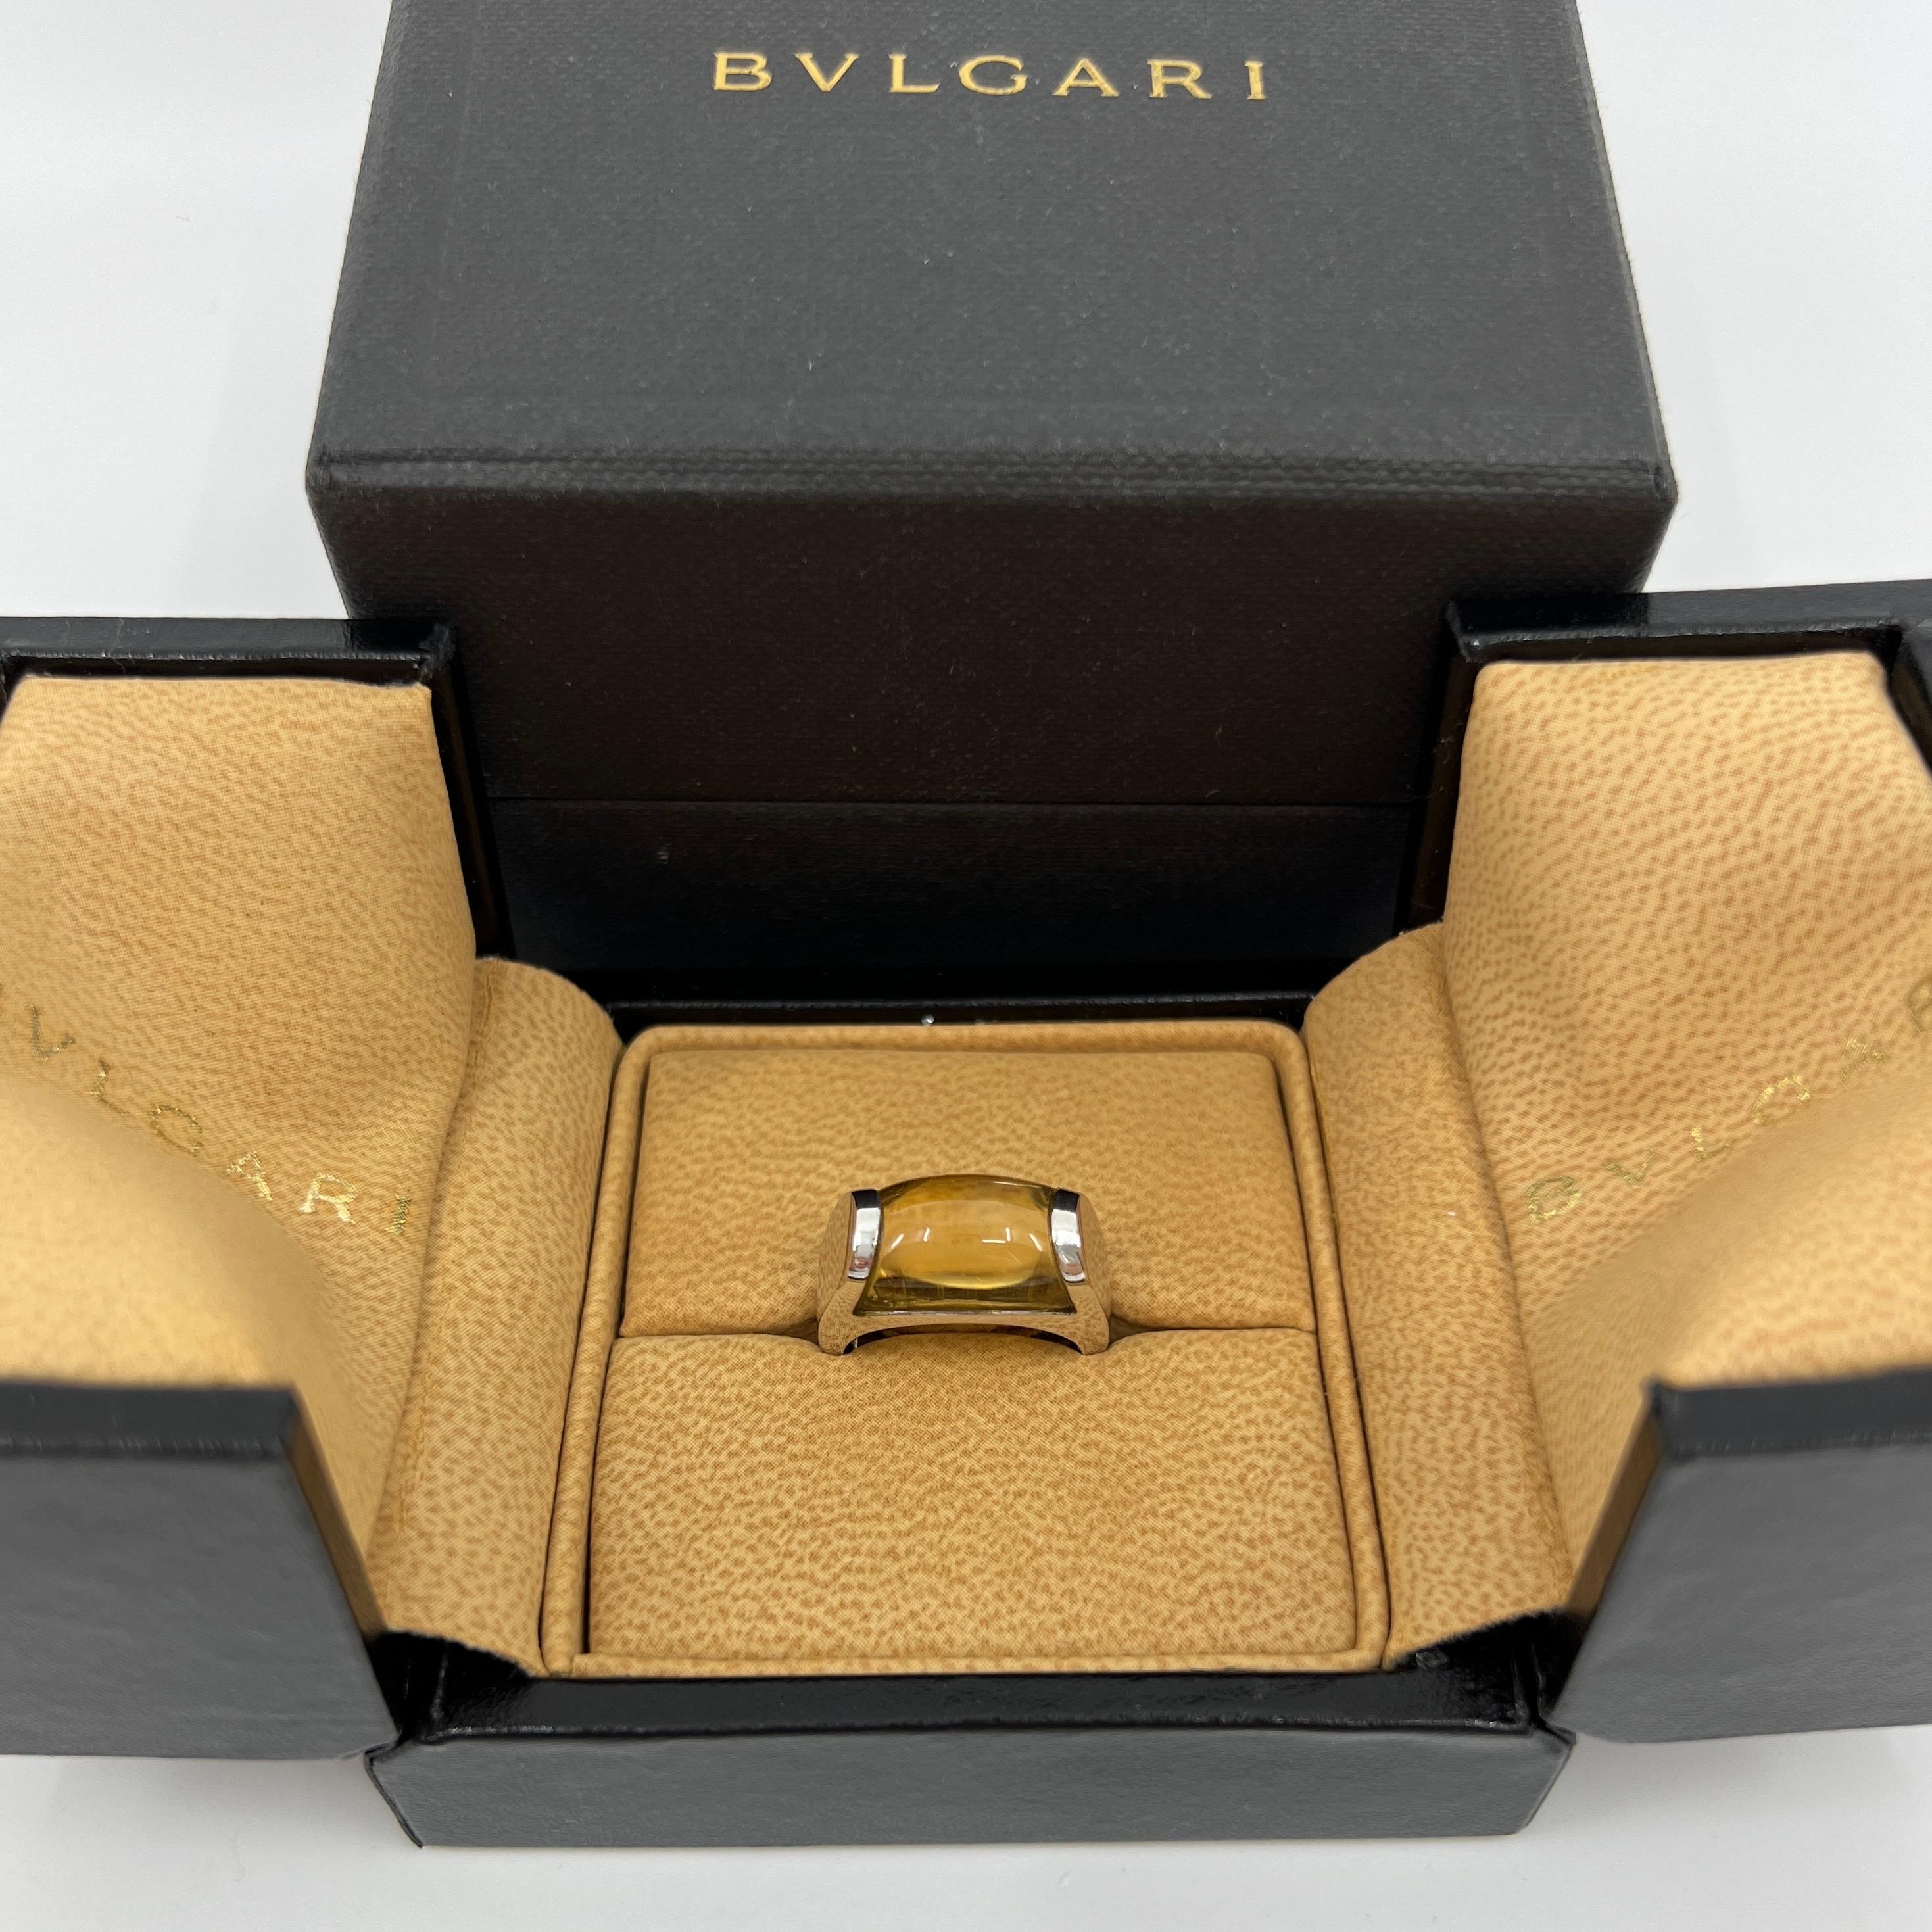 Rare Bvlgari Light Yellow Citrine Tronchetto 18k White Gold Ring.

Beautiful domed yellow citrine set in a fine 18k white gold tension set ring.

In excellent condition, has been professionally polished and cleaned.

Ring size: UK J1/2 - US 5 - EU